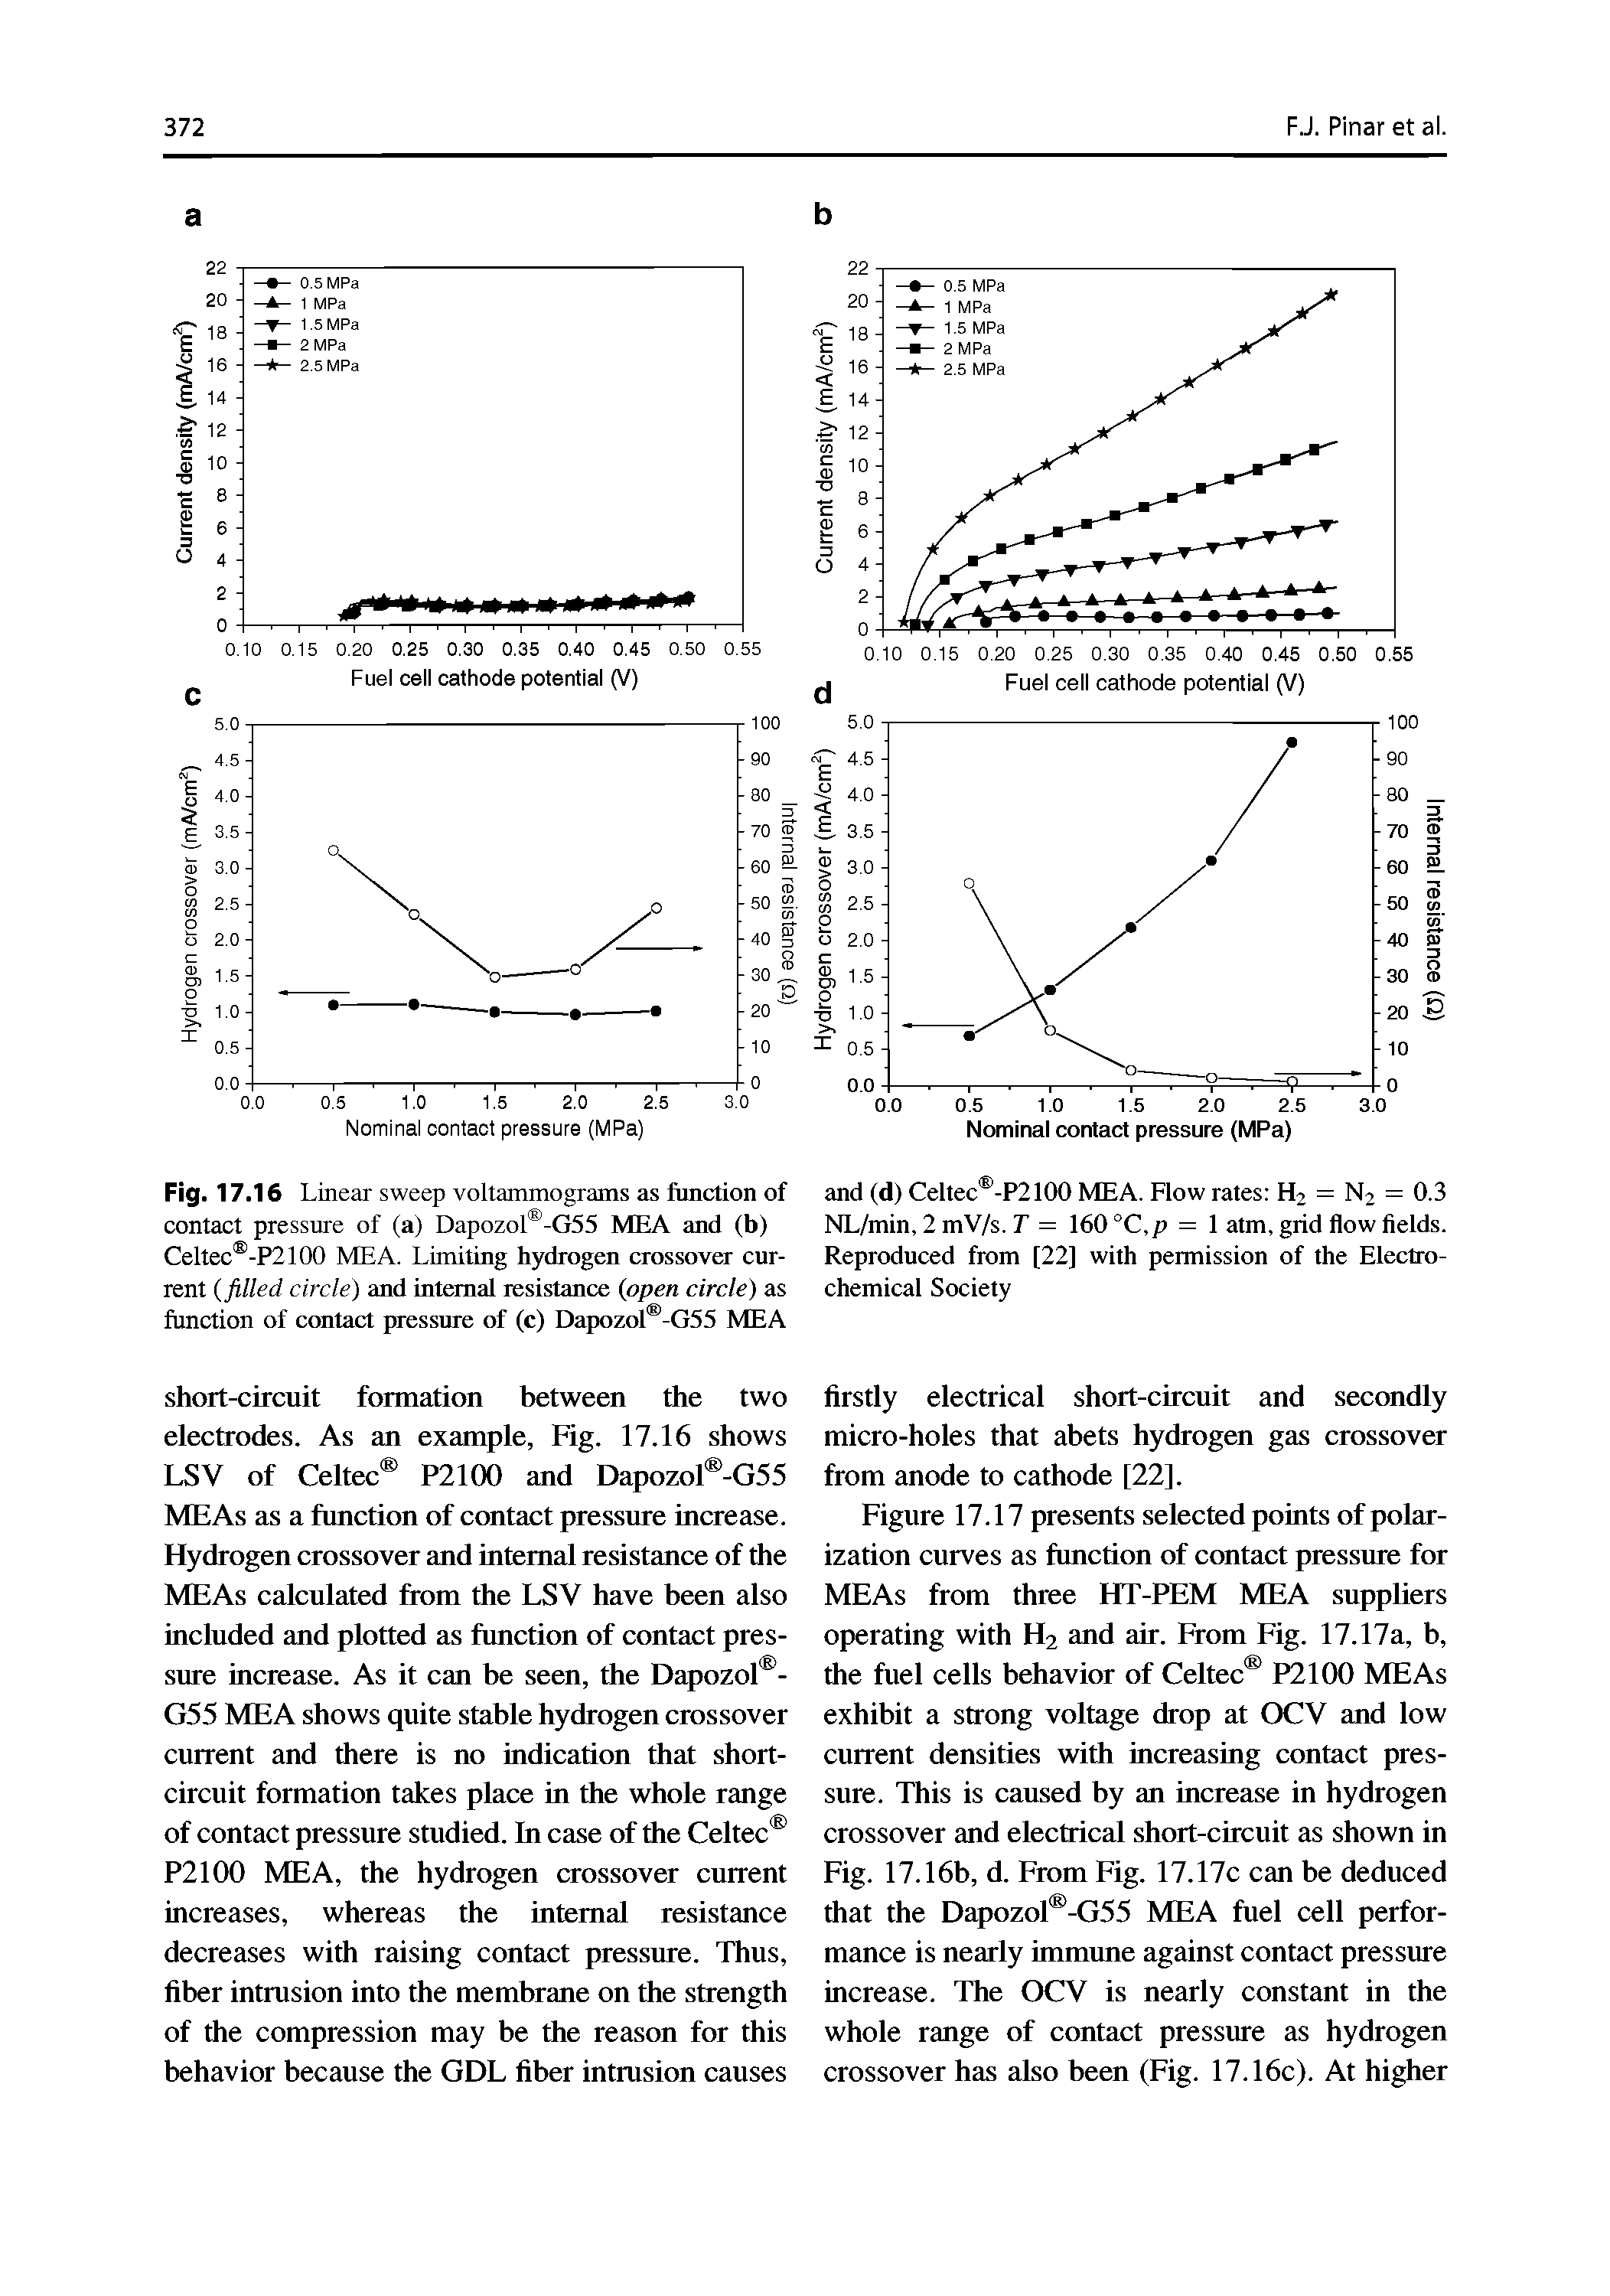 Figure 17.17 presents selected points of polarization curves as function of contact pressure for MEAs from three HT-PEM MEA suppliers operating with H2 and air. From Fig. 17.17a, b, the fuel cells behavior of Celtec P2100 MEAs exhibit a strong voltage drop at OCV and low current densities with increasing contact pressure. This is caused by an increase in hydrogen crossover and electrical short-circuit as shown in Fig. 17.16b, d. From Fig. 17.17c can be deduced that the Dapozol -G55 MEA fuel cell performance is nearly immune against contact pressure increase. The OCV is nearly constant in the whole range of contact pressure as hydrogen crossover has also been (Fig. 17.16c). At higher...